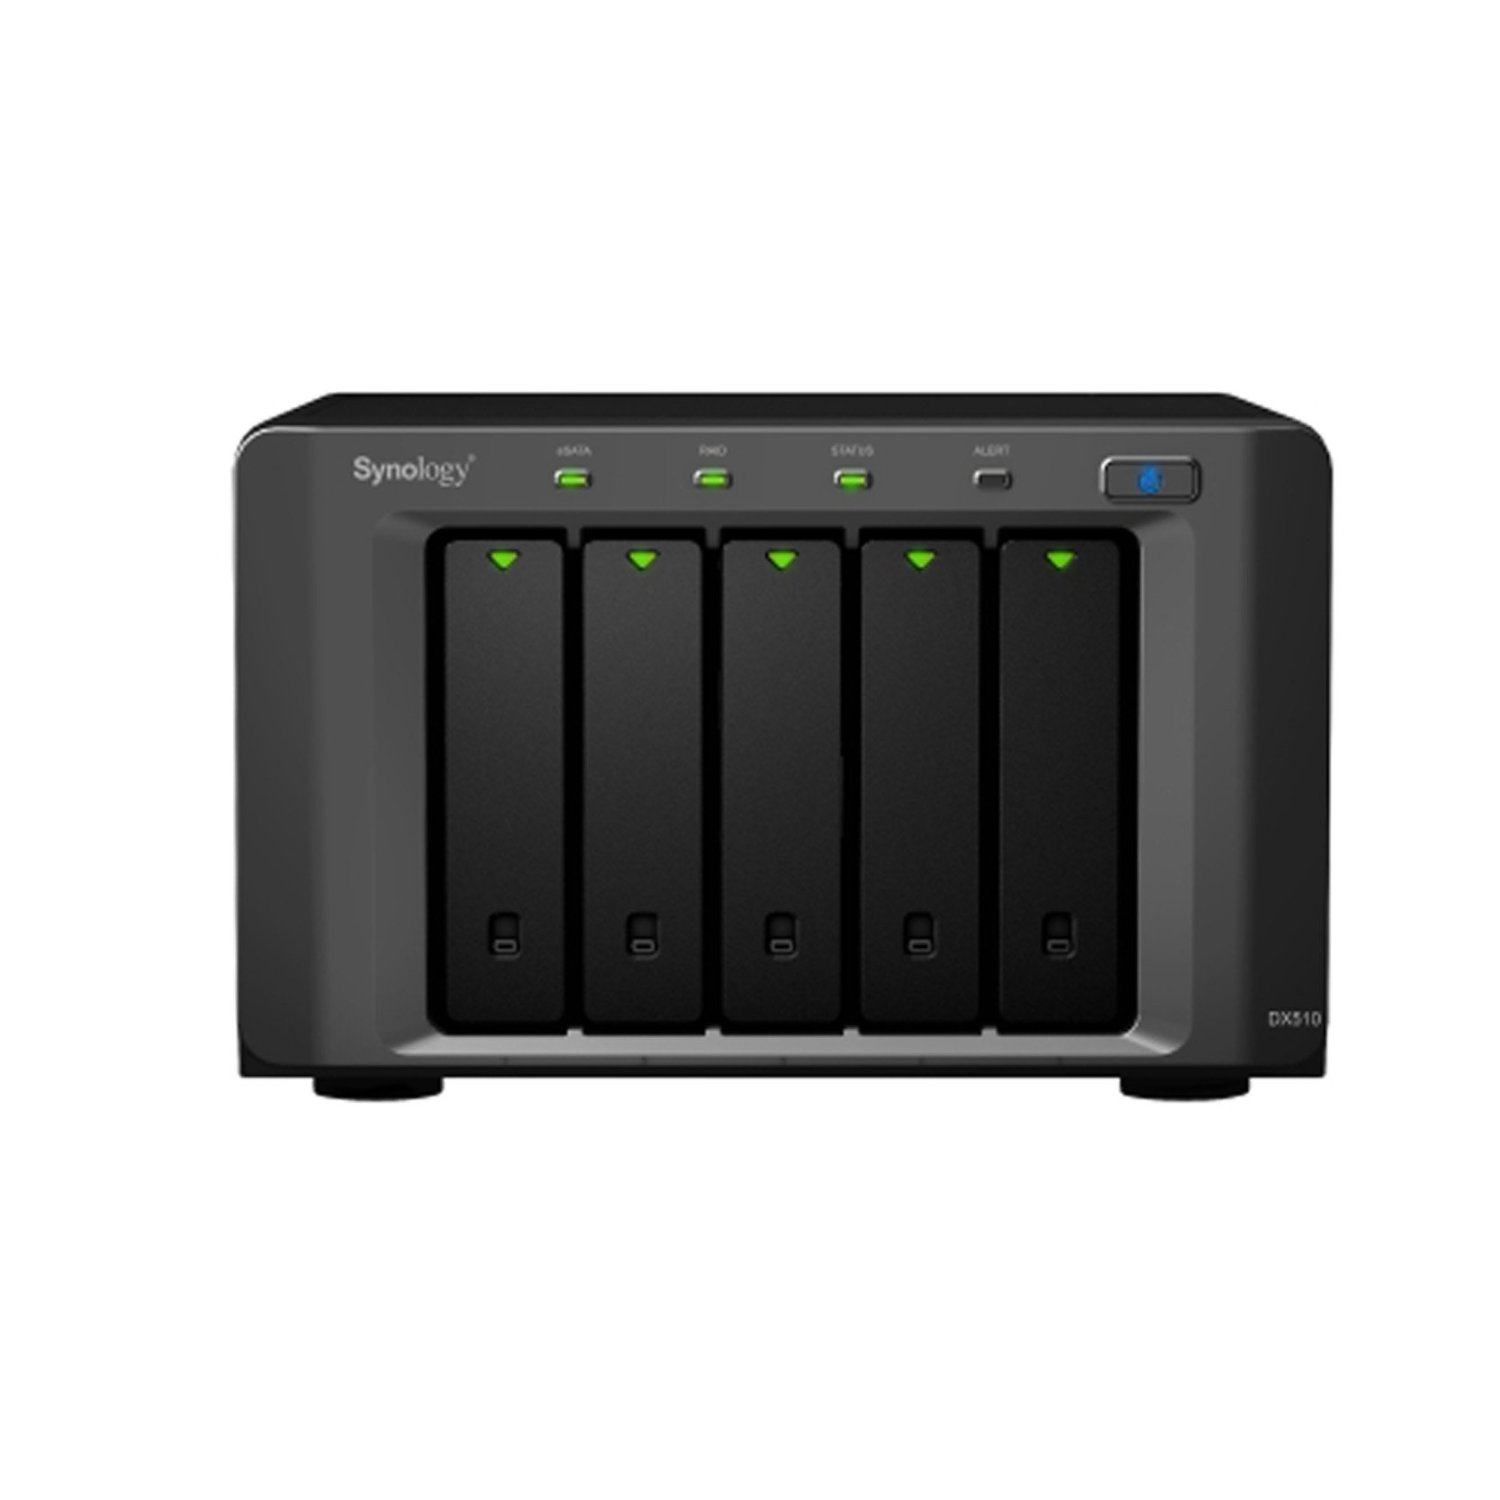 http://thetechjournal.com/wp-content/uploads/images/1201/1326213814-synology-5bay-plugnuse-expansion-unit-1.jpg